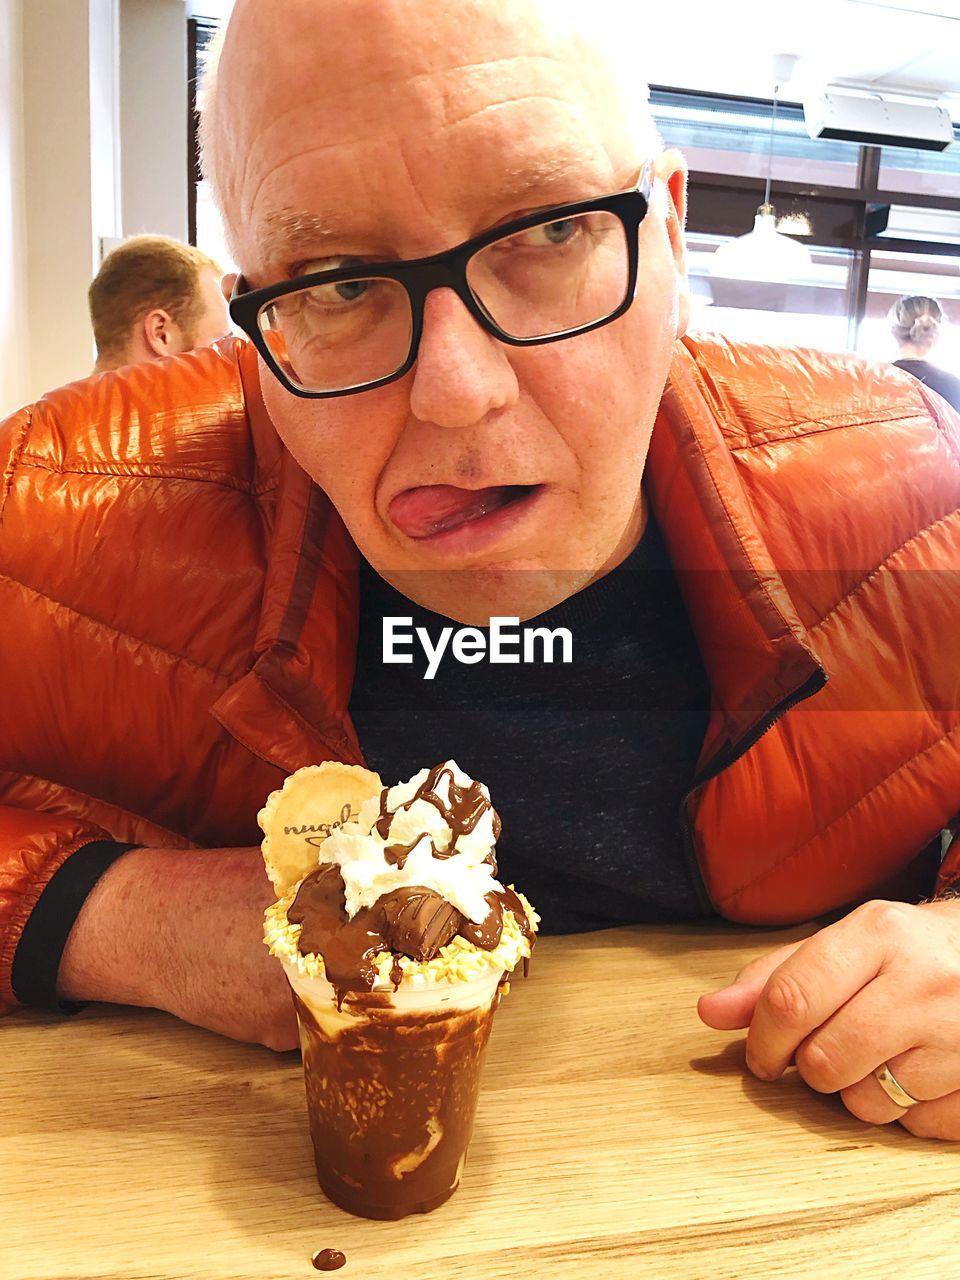 PORTRAIT OF MAN WITH ICE CREAM IN GLASSES